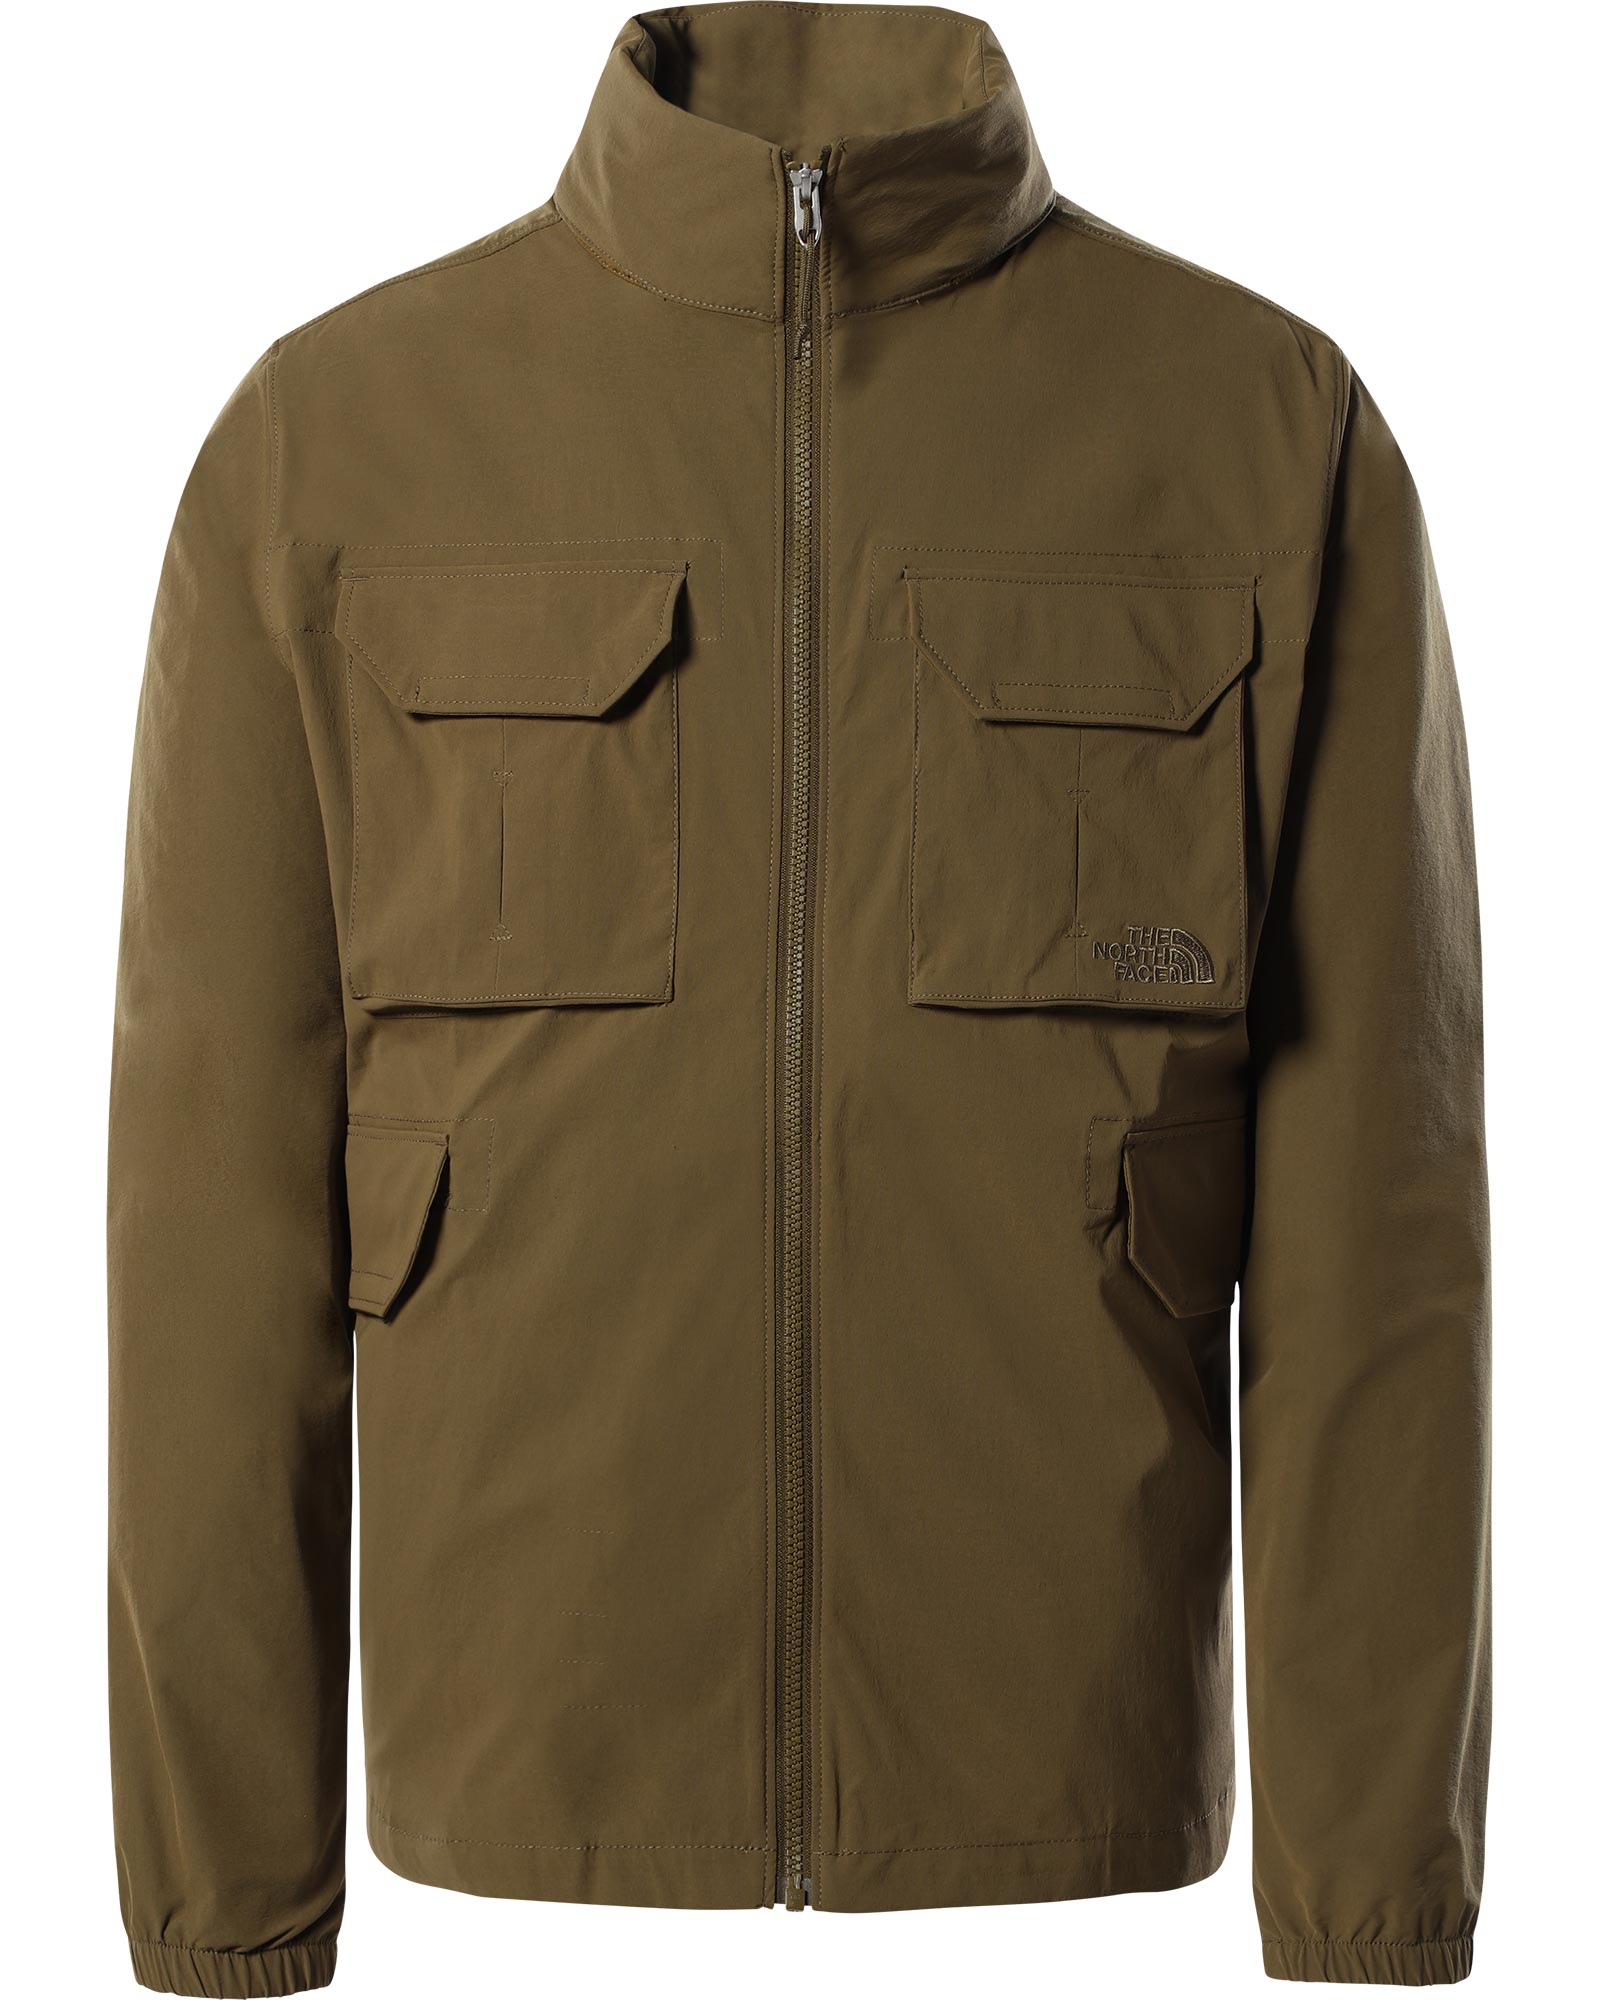 The North Face Sightseer Men’s Jacket - Military Olive S